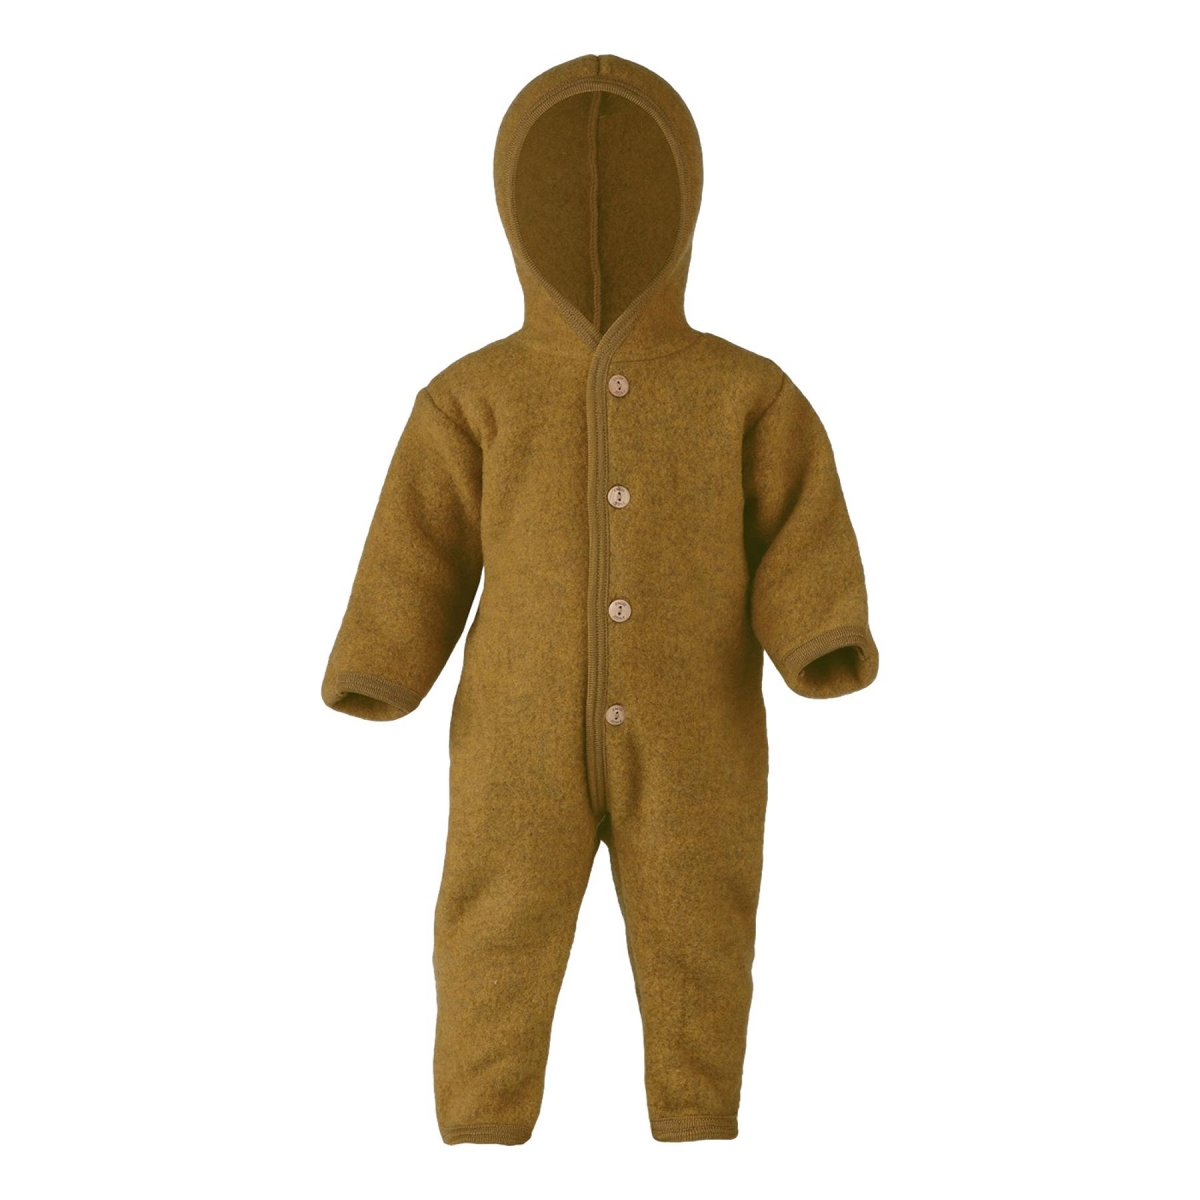 ENGEL Natur Hooded overall with buttons Saffron melange